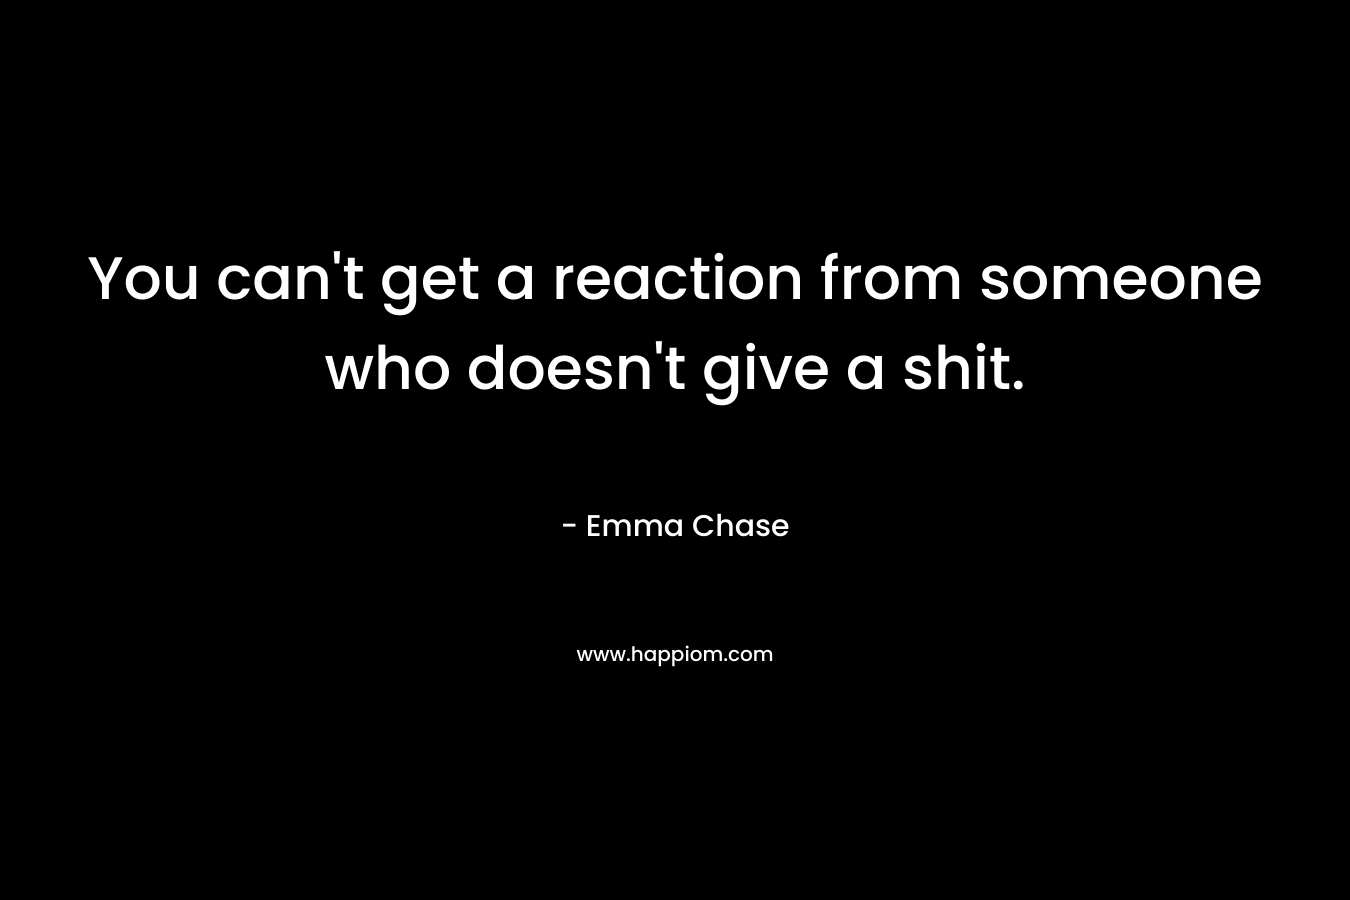 You can't get a reaction from someone who doesn't give a shit.